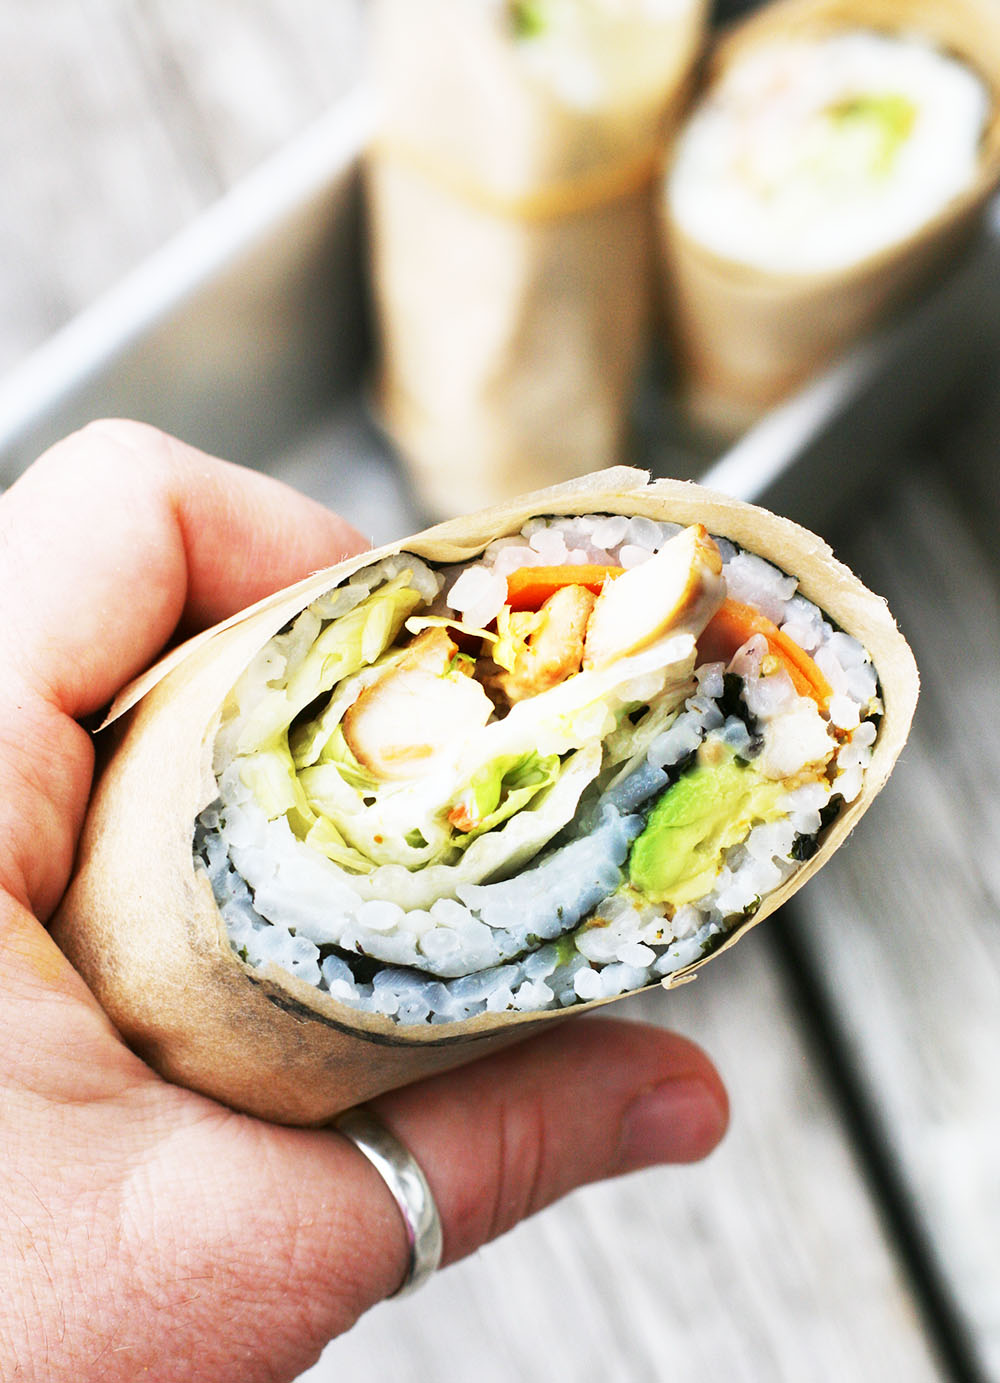 Chicken sushi burritos: Learn how to make sushi burritos at home, with teriyaki chicken!